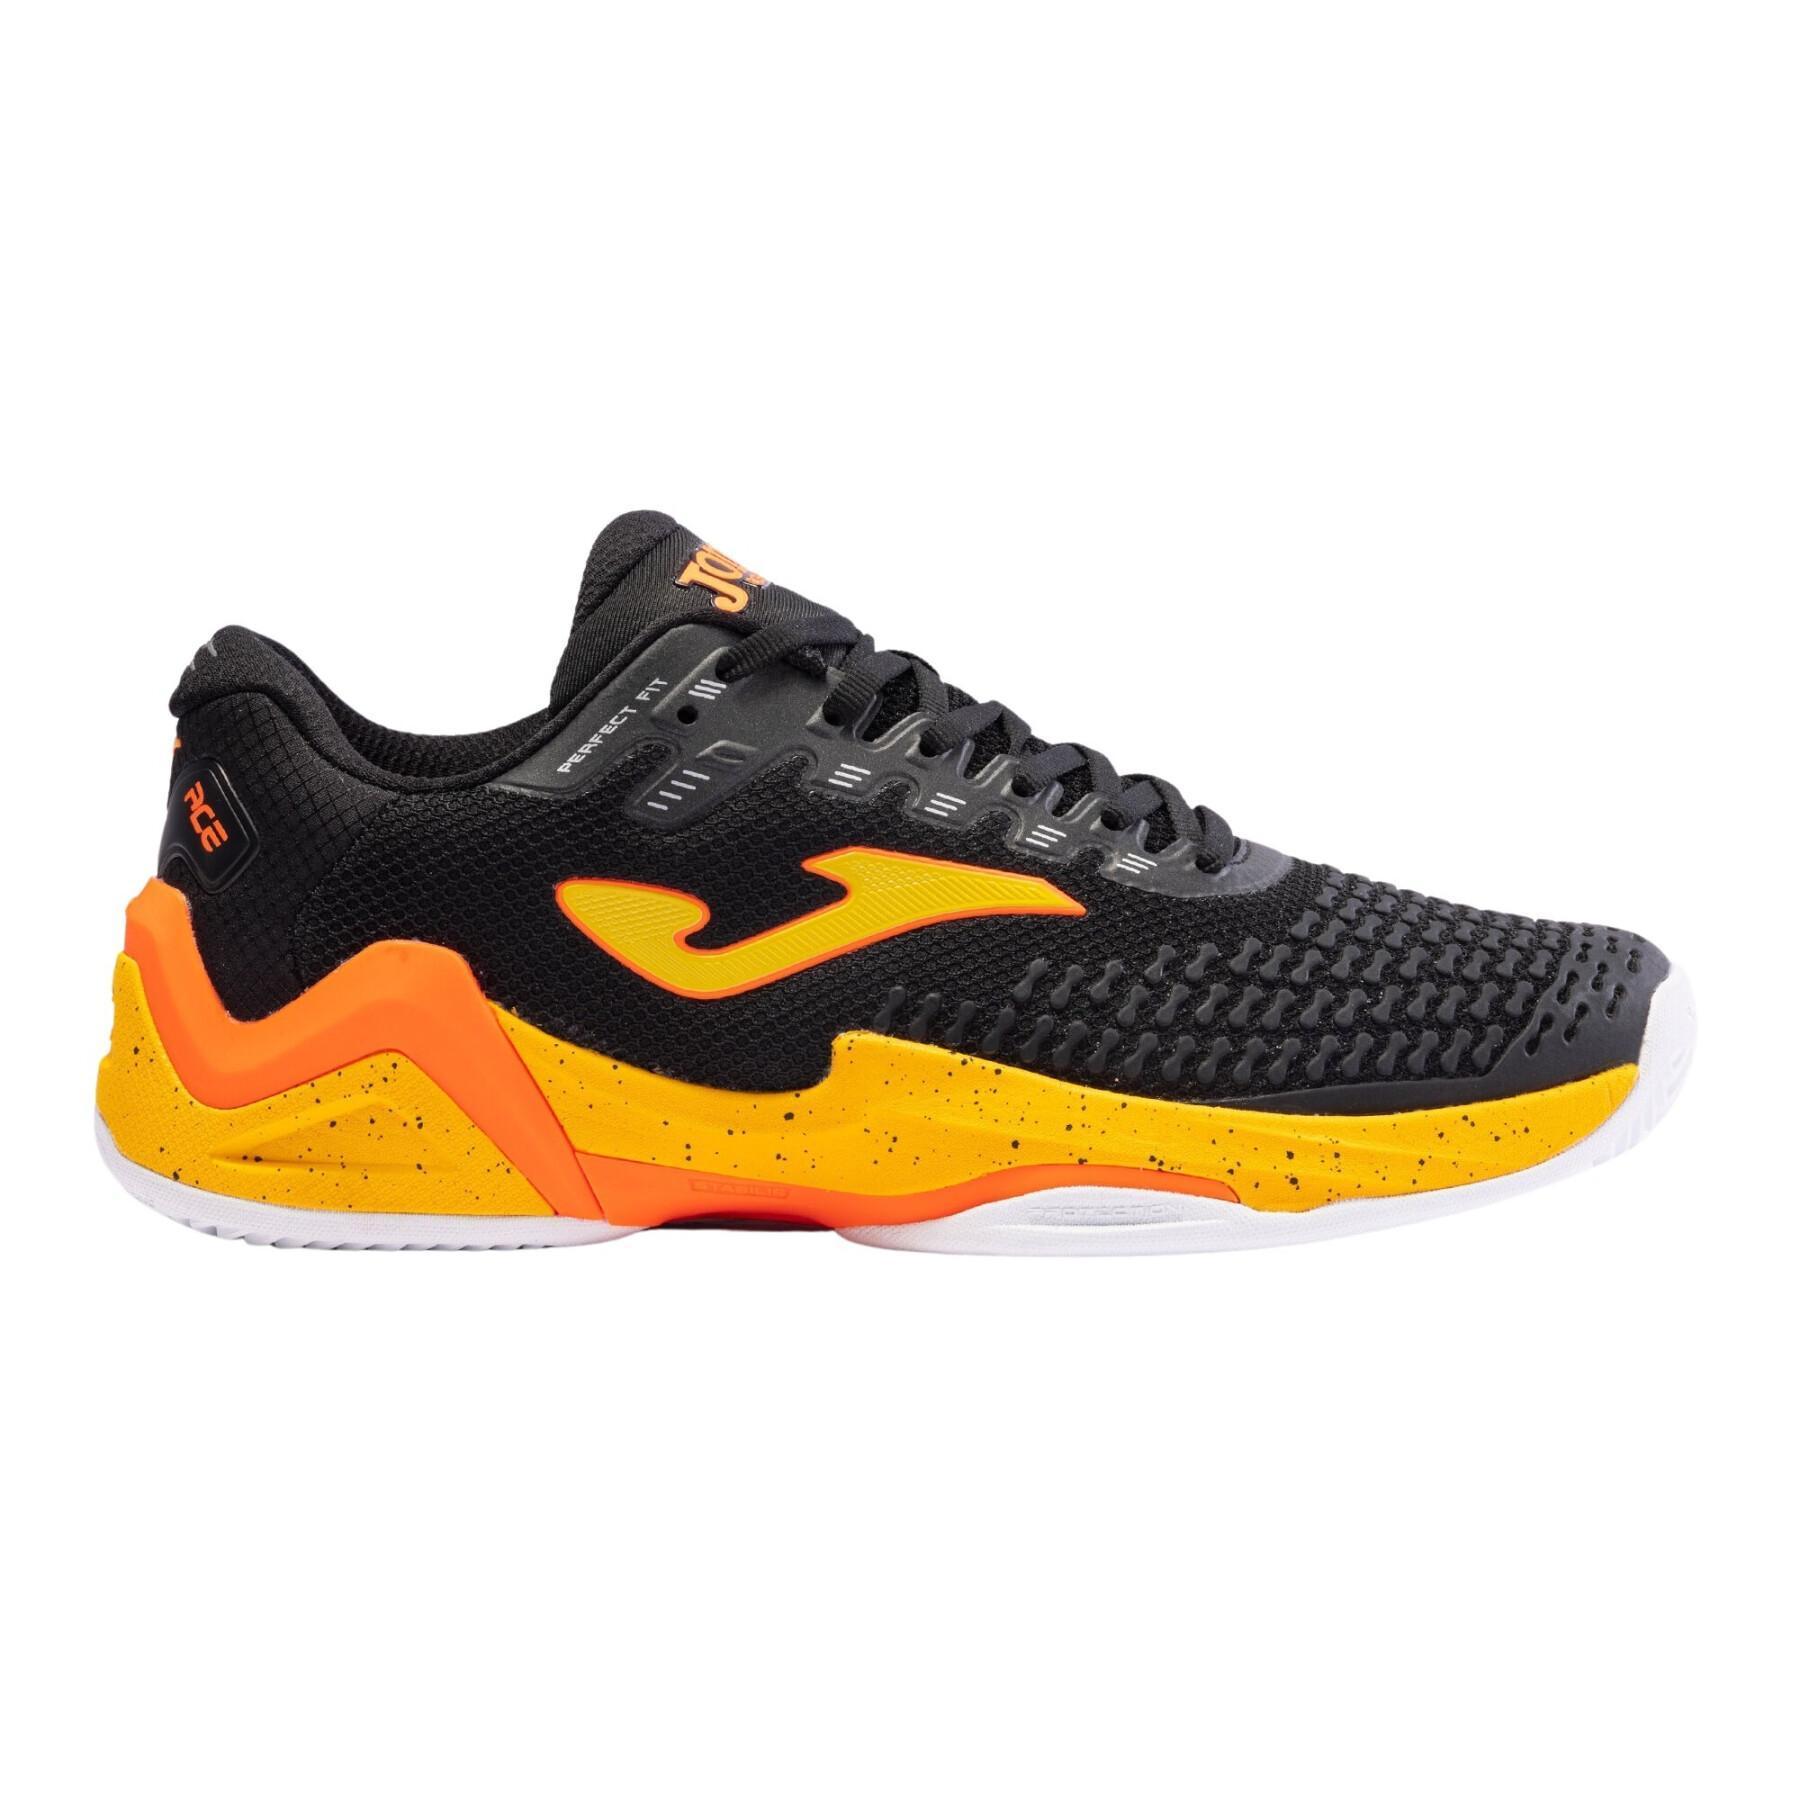 Padel shoes Joma T.Ace 2301 - Joma - Other Brands - Shoes